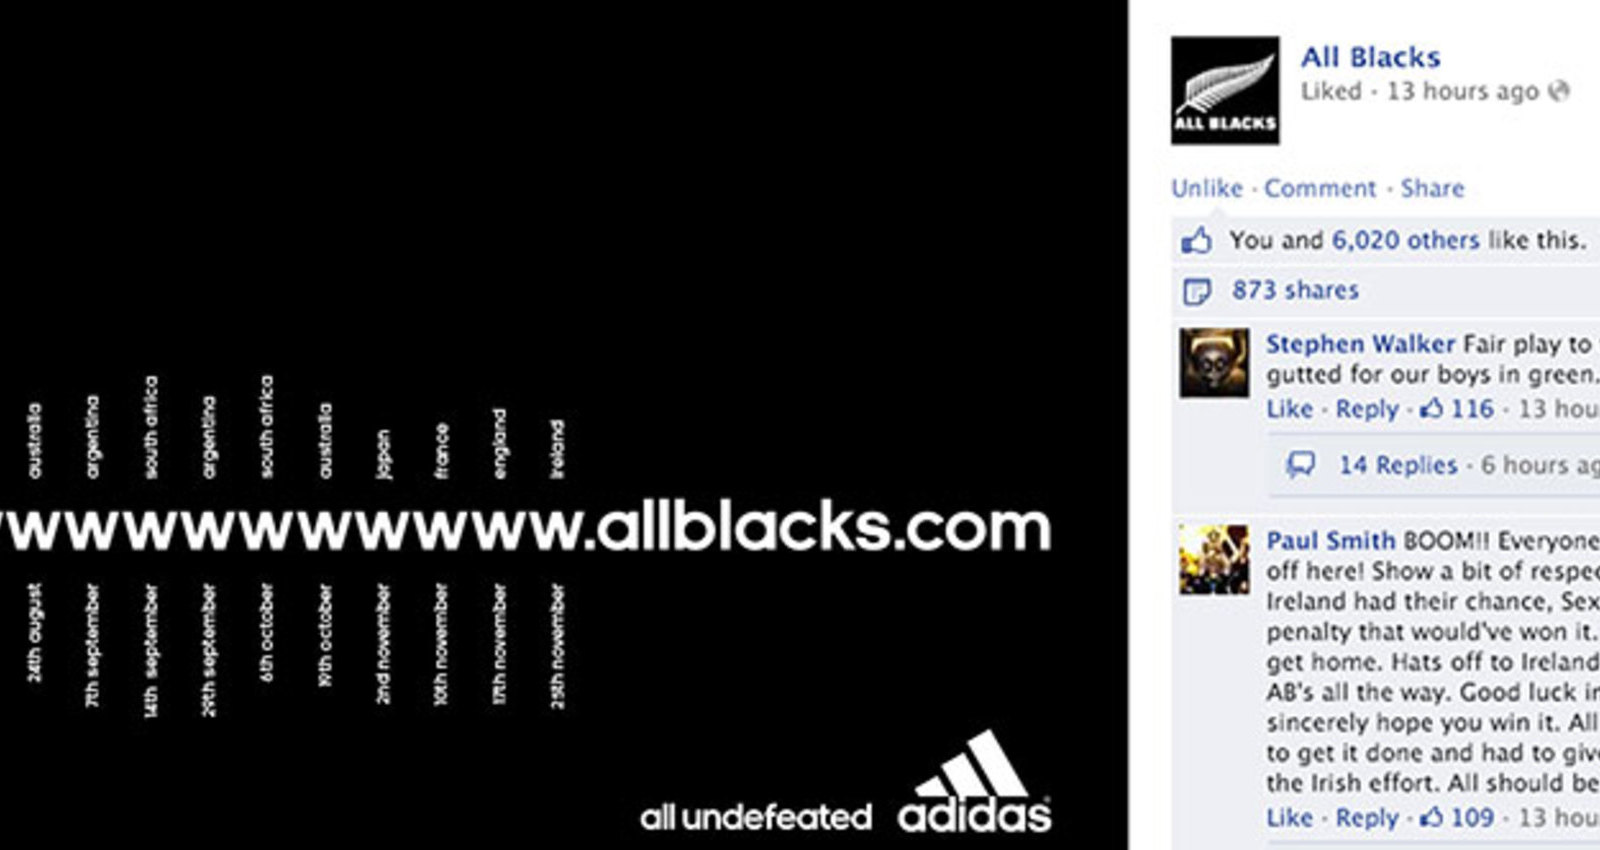 adidas All Blacks all undefeated in 2013